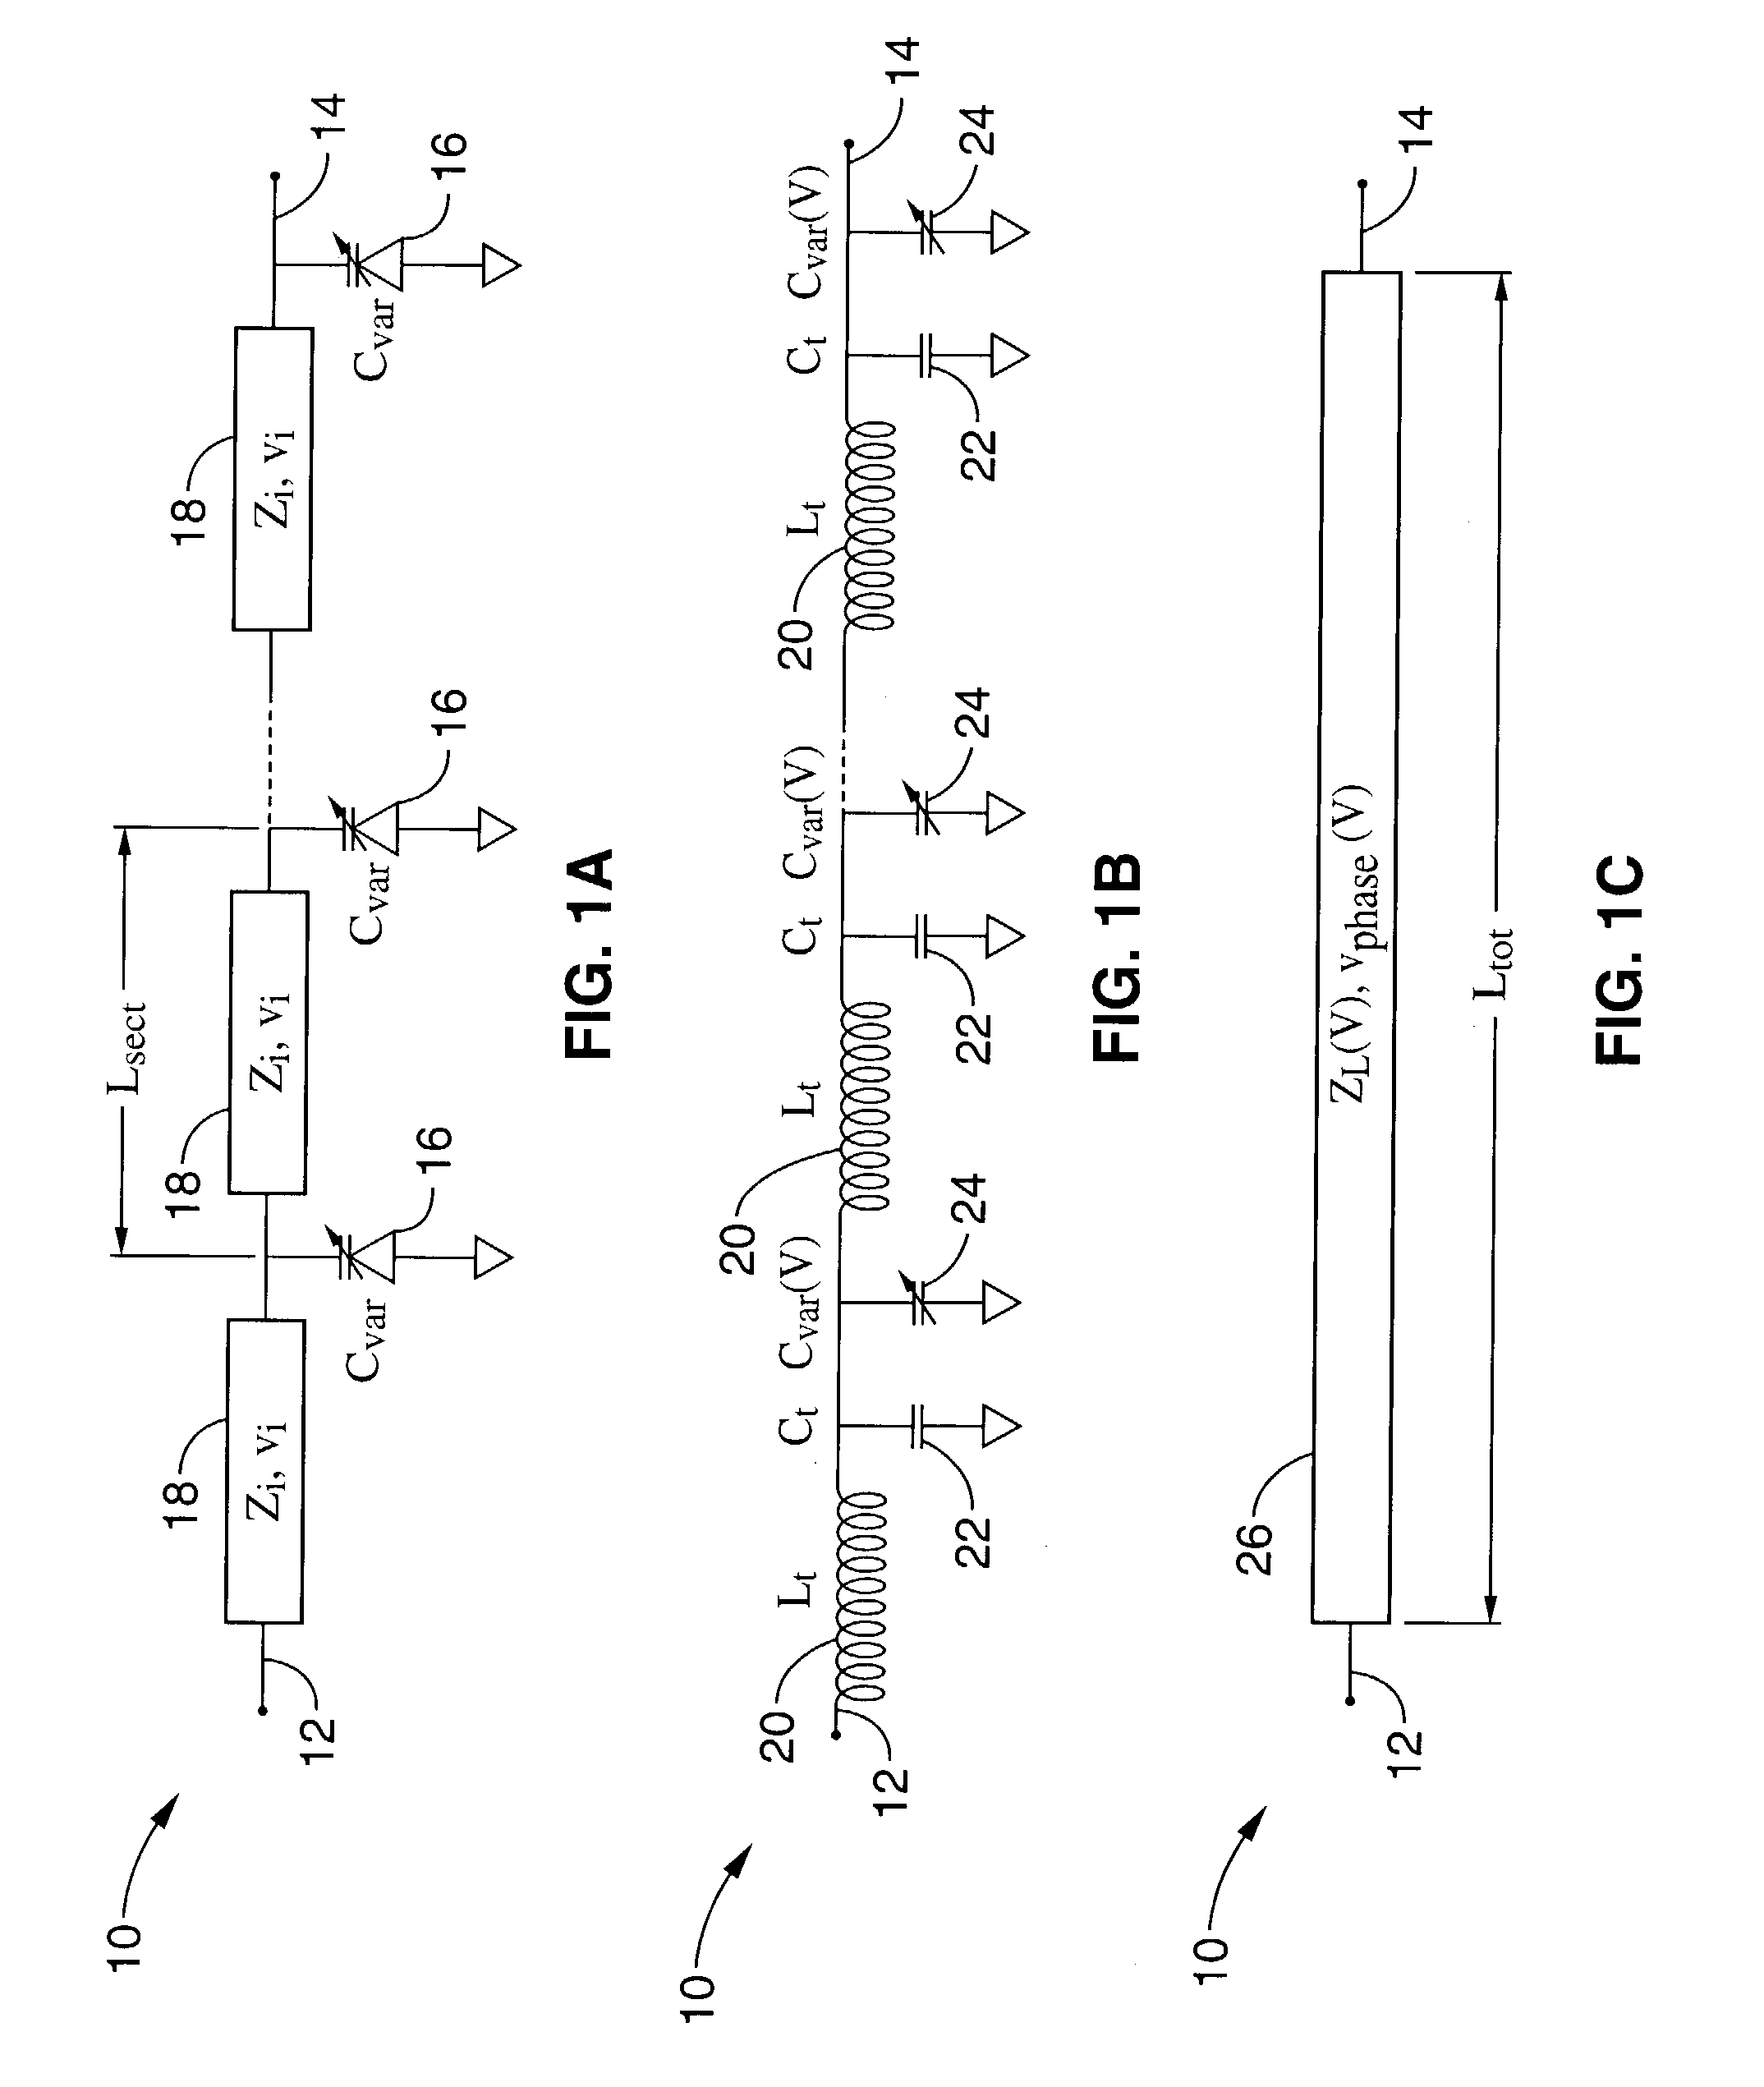 Phase shifters using transmission lines periodically loaded with Barium Strontium Titanate (BST) capacitors